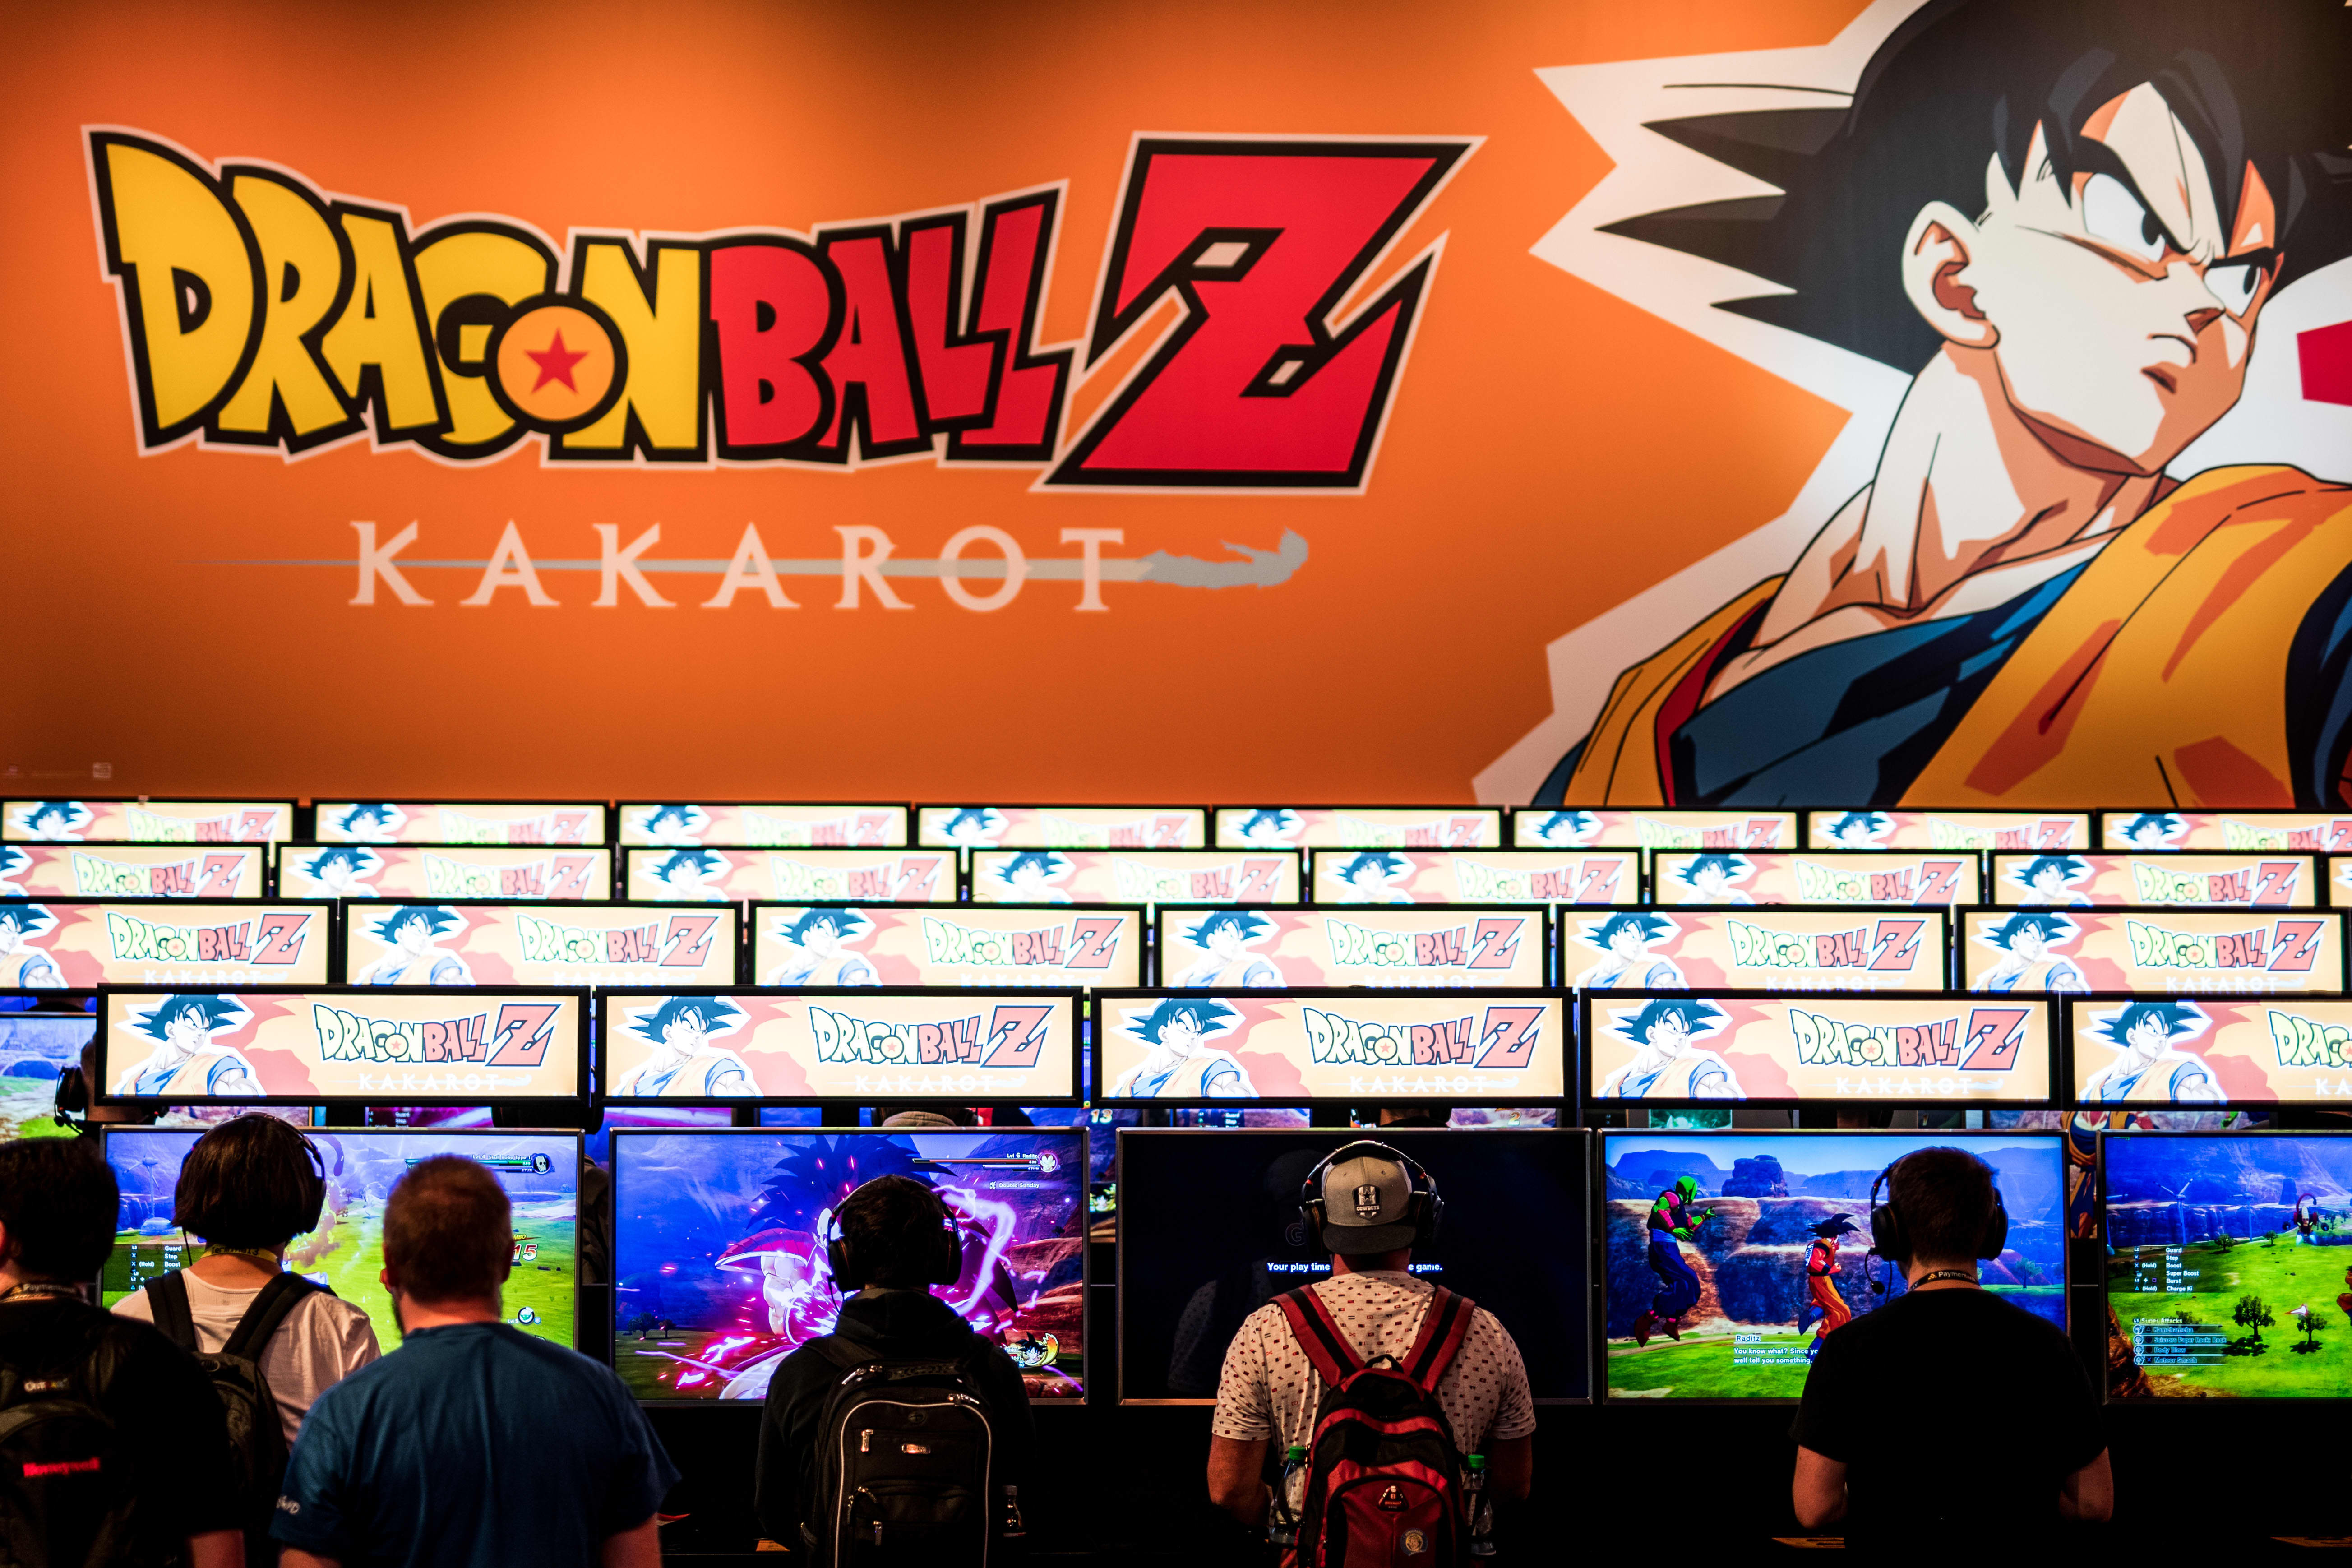 The world’s first Dragon Ball Z theme park is being built in Saudi Arabia